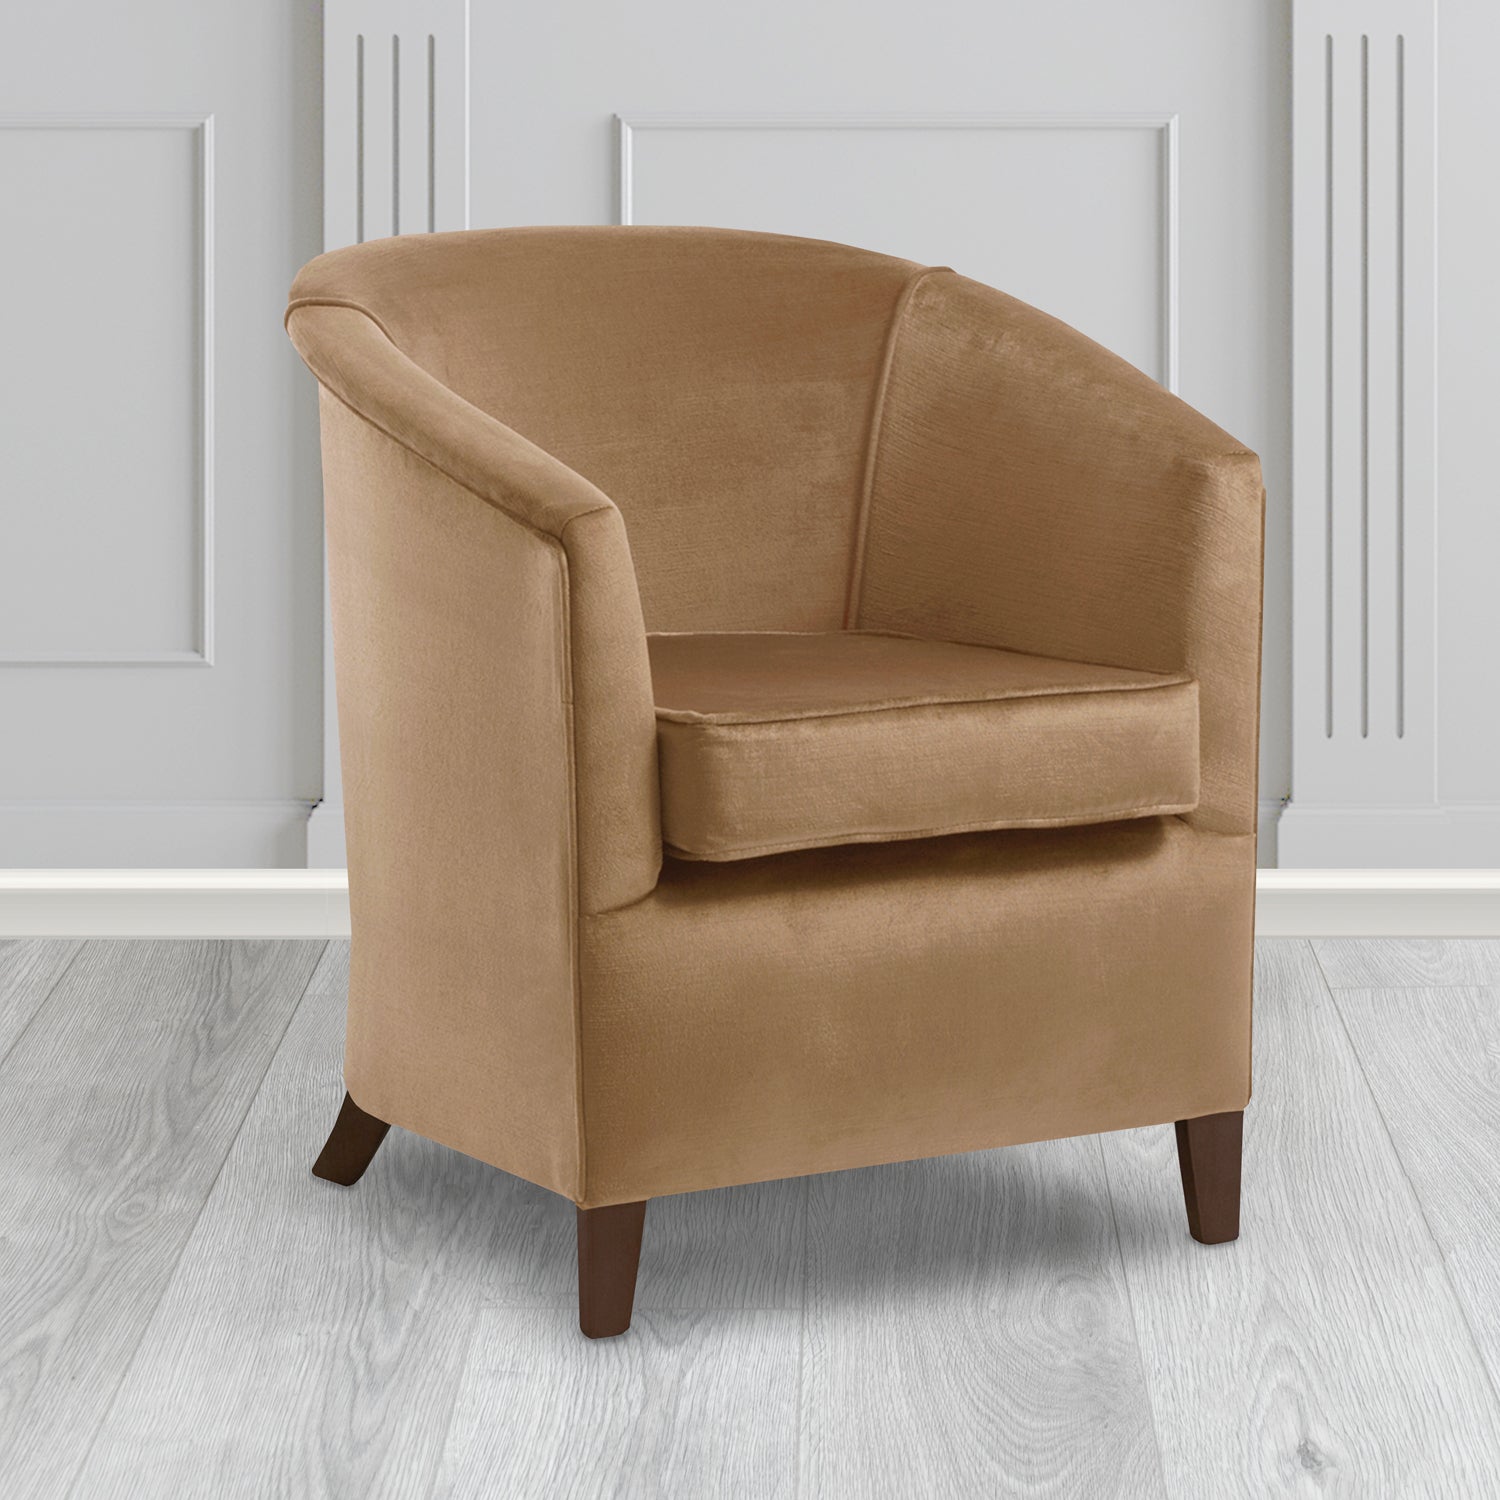 Jasmine Tub Chair in Noble 806 Camel Crib 5 Velvet Fabric - Water Resistant - The Tub Chair Shop